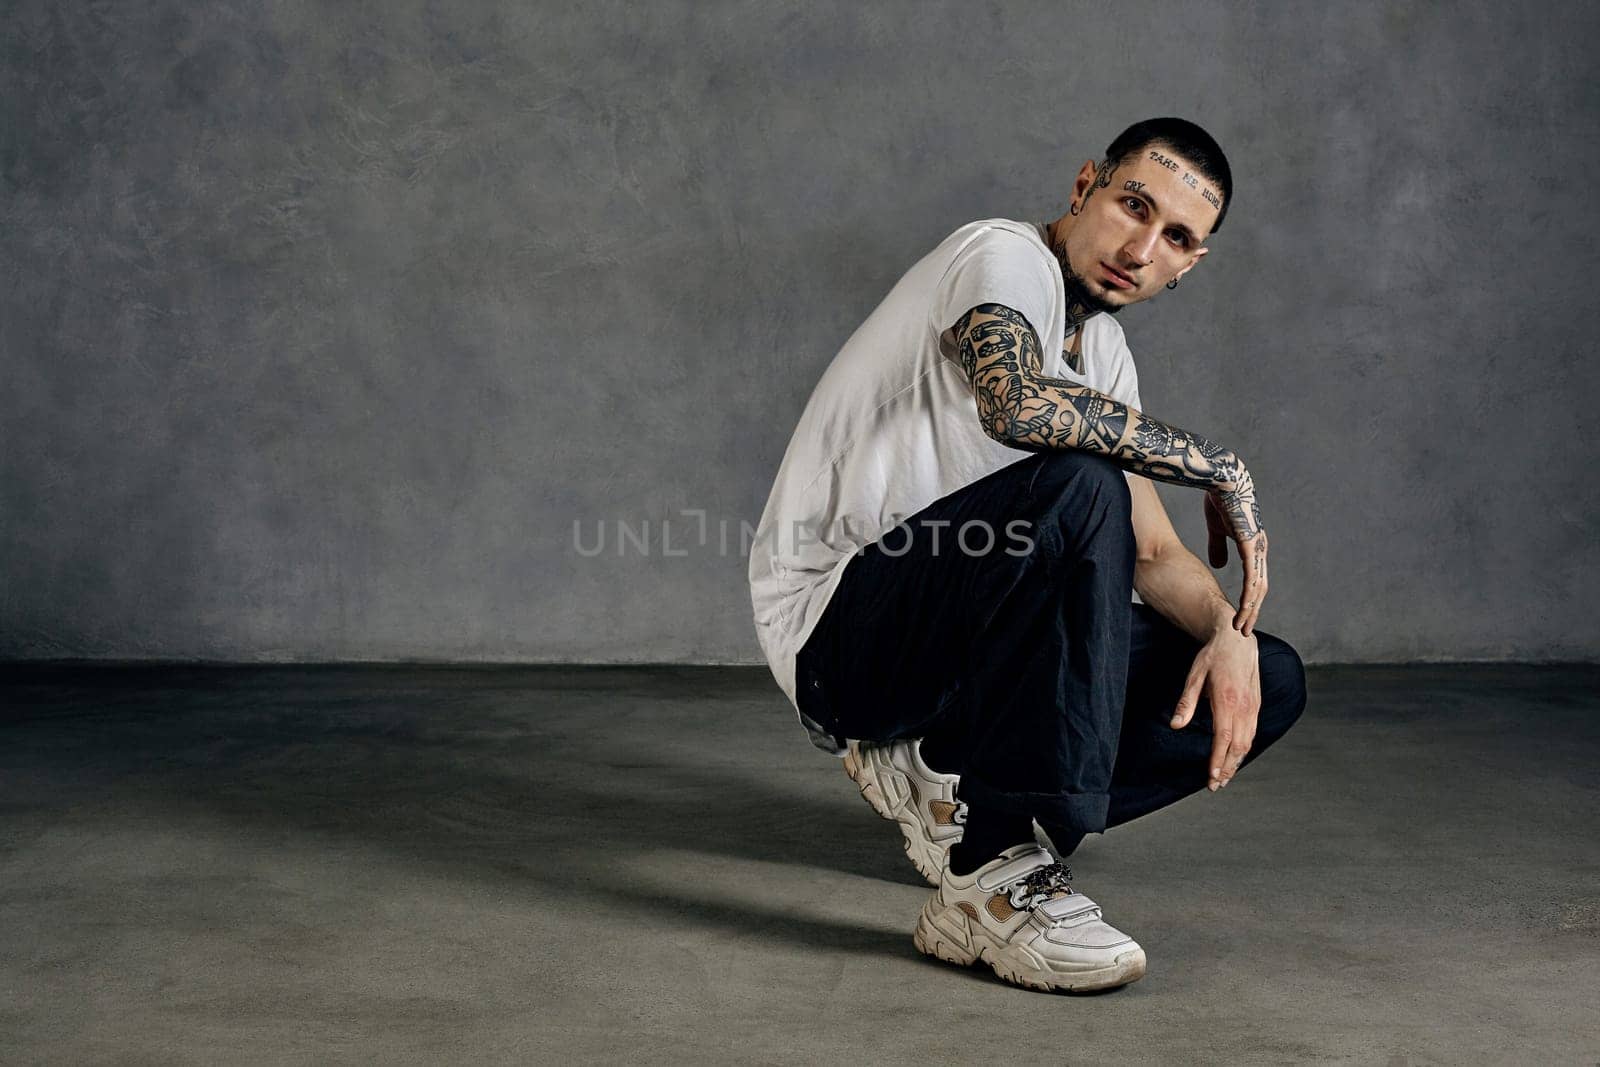 Flexible guy with tattooed body and face, earrings, beard. Dressed in white t-shirt and sneakers, black sports trousers. Squatting sideways against gray background. Dancehall, hip-hop. Close up